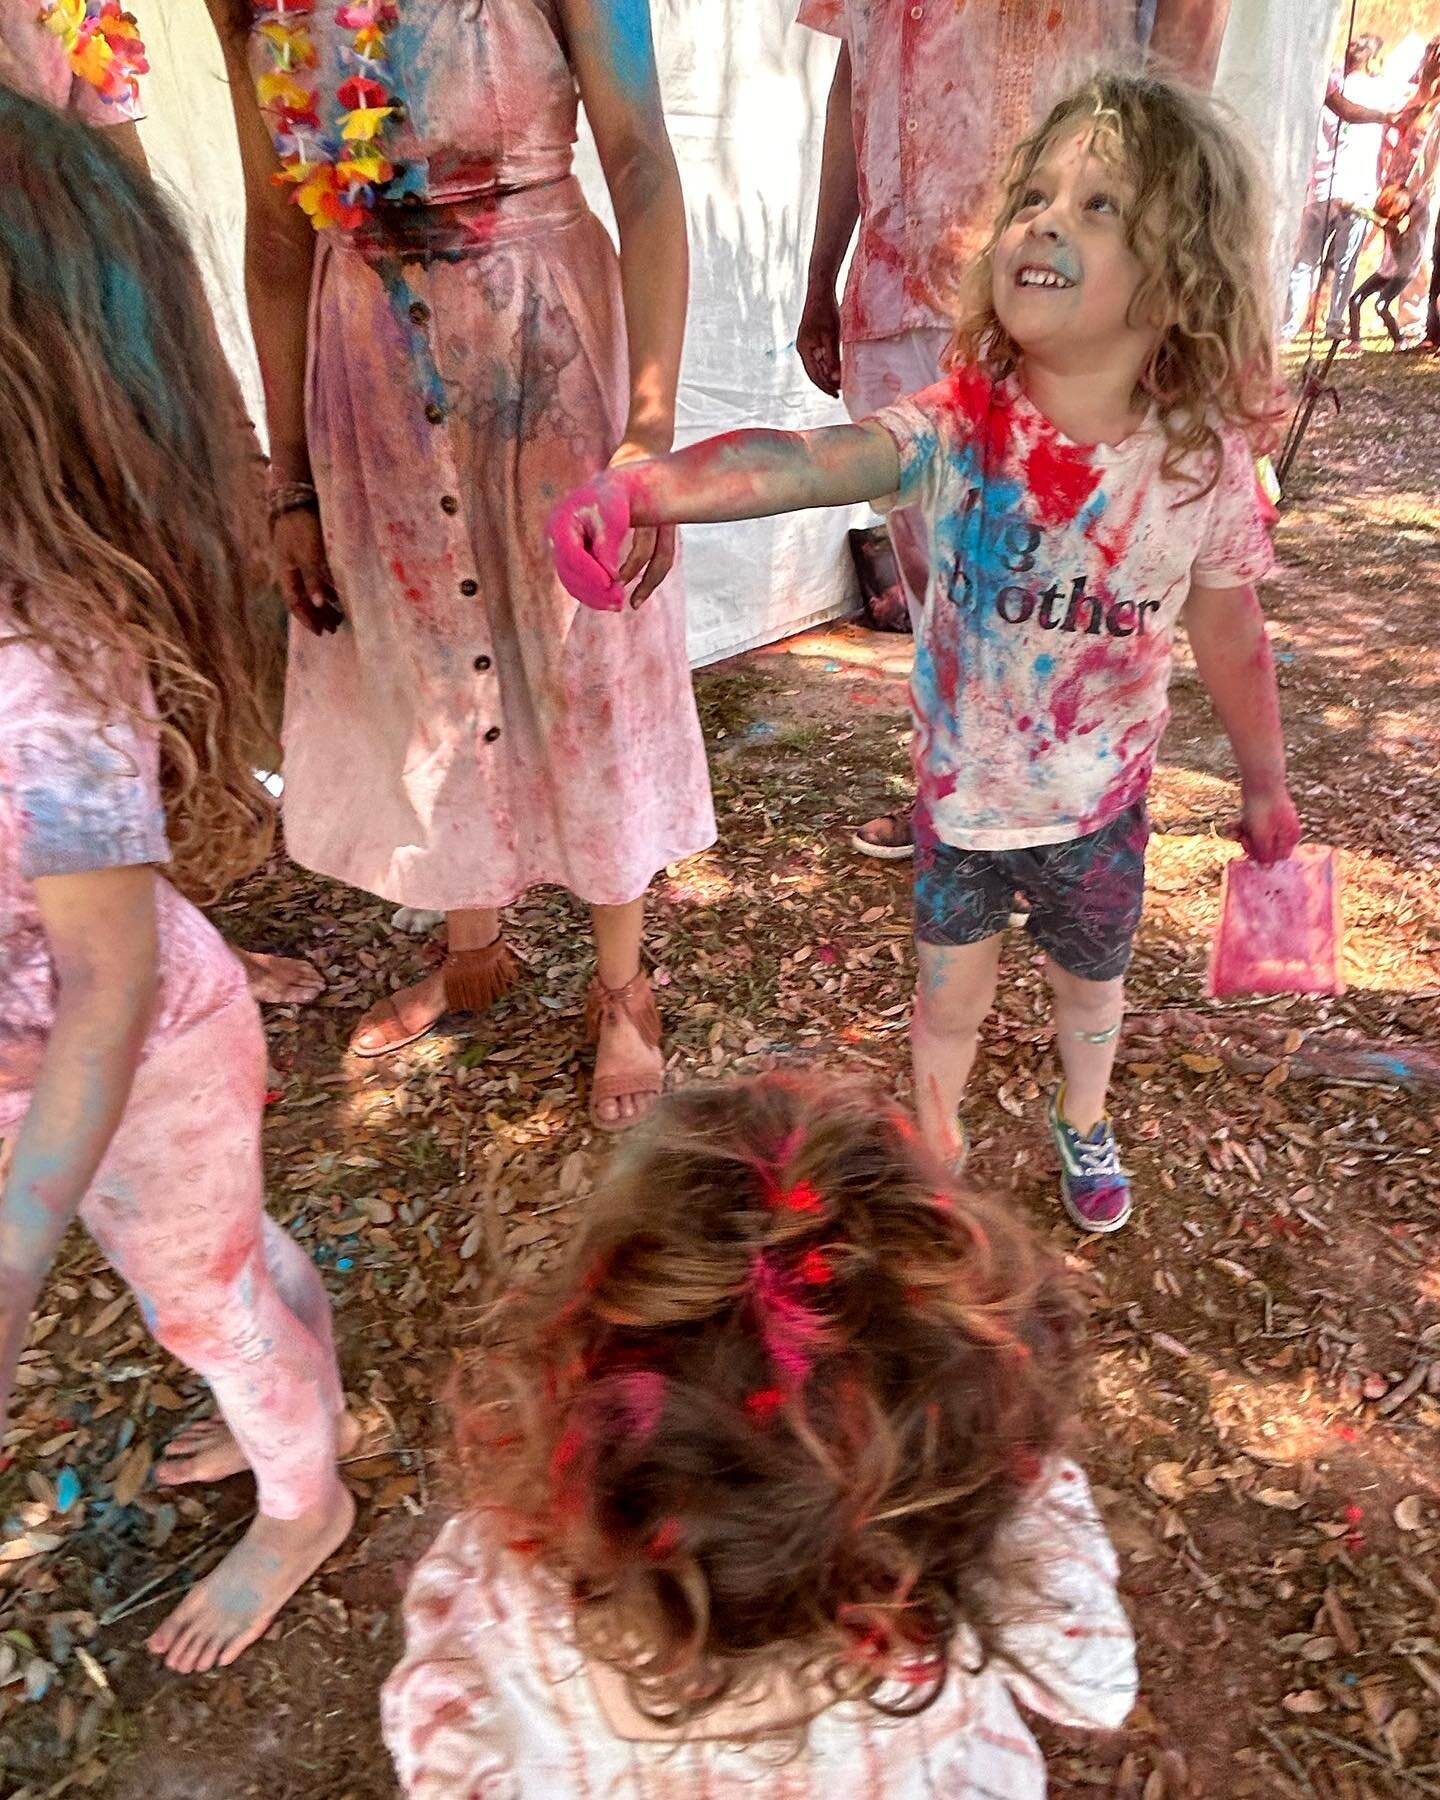 We welcomed @josoy back home and ushered in Spring with the Holi Festival in Lafayette ❤️💜💛💙🧡💚

#playtime #holi #hindutradition #welcomespring #festivalofcolors